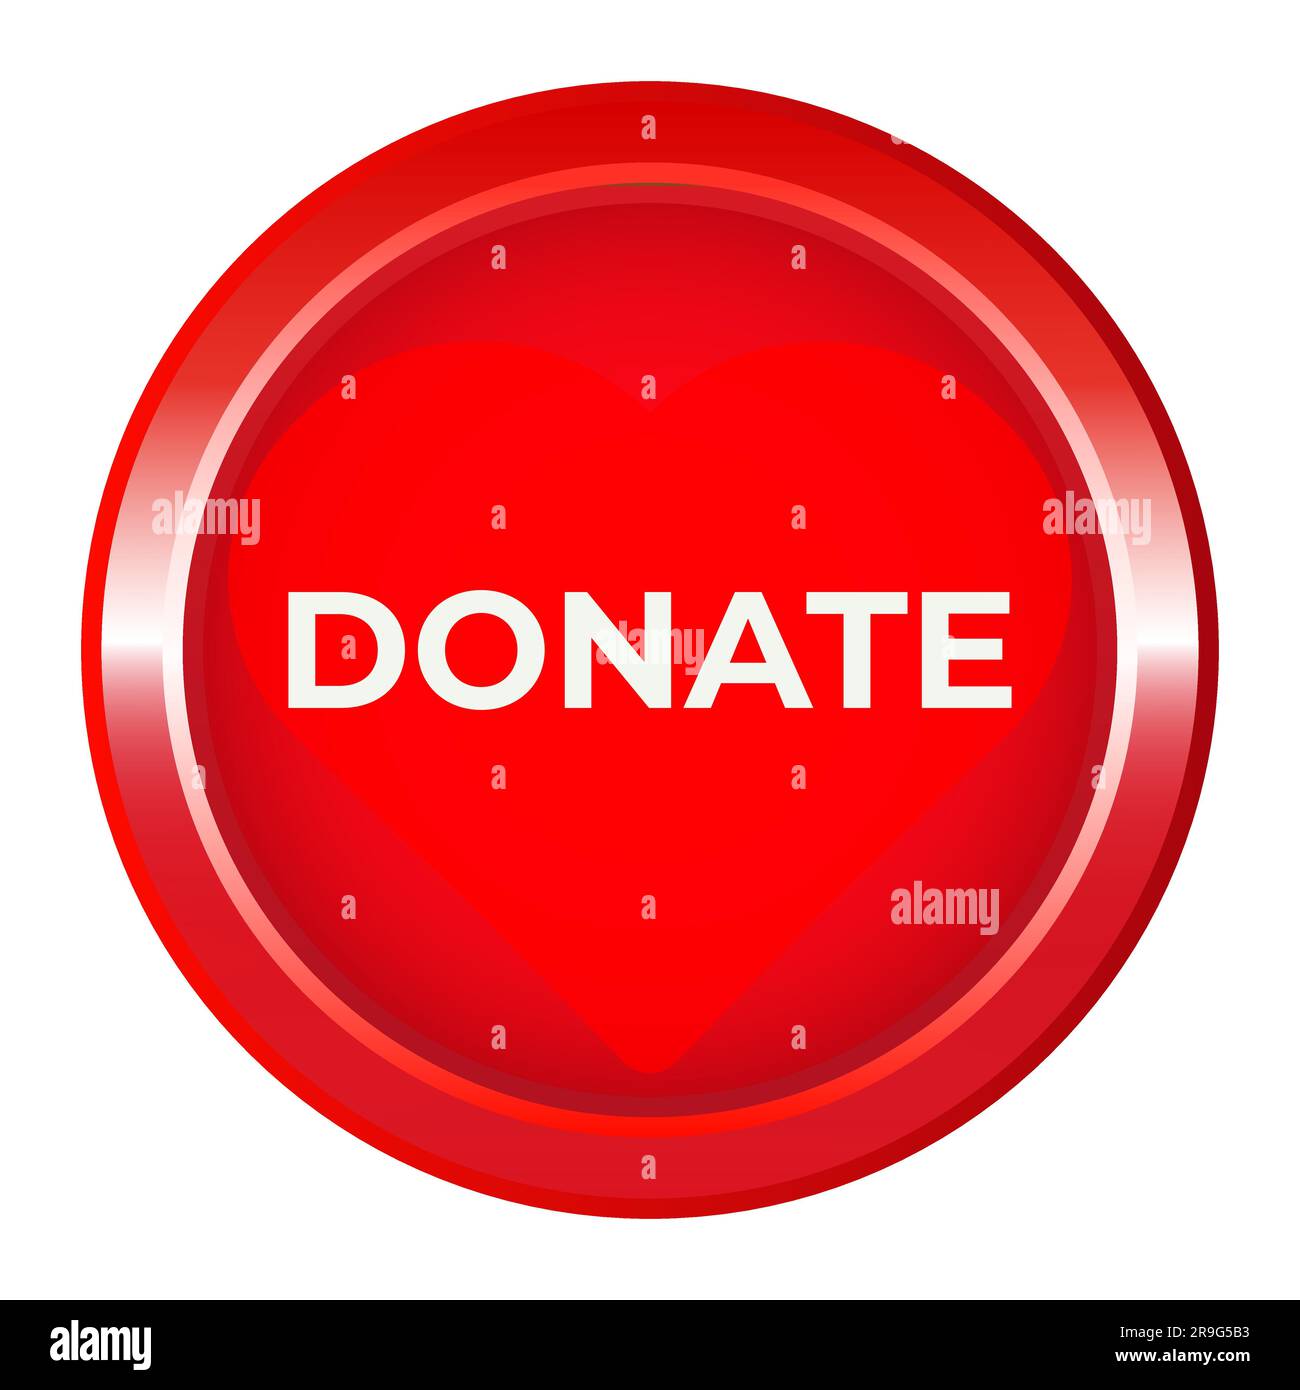 modern red please donate now sign Stock Vector